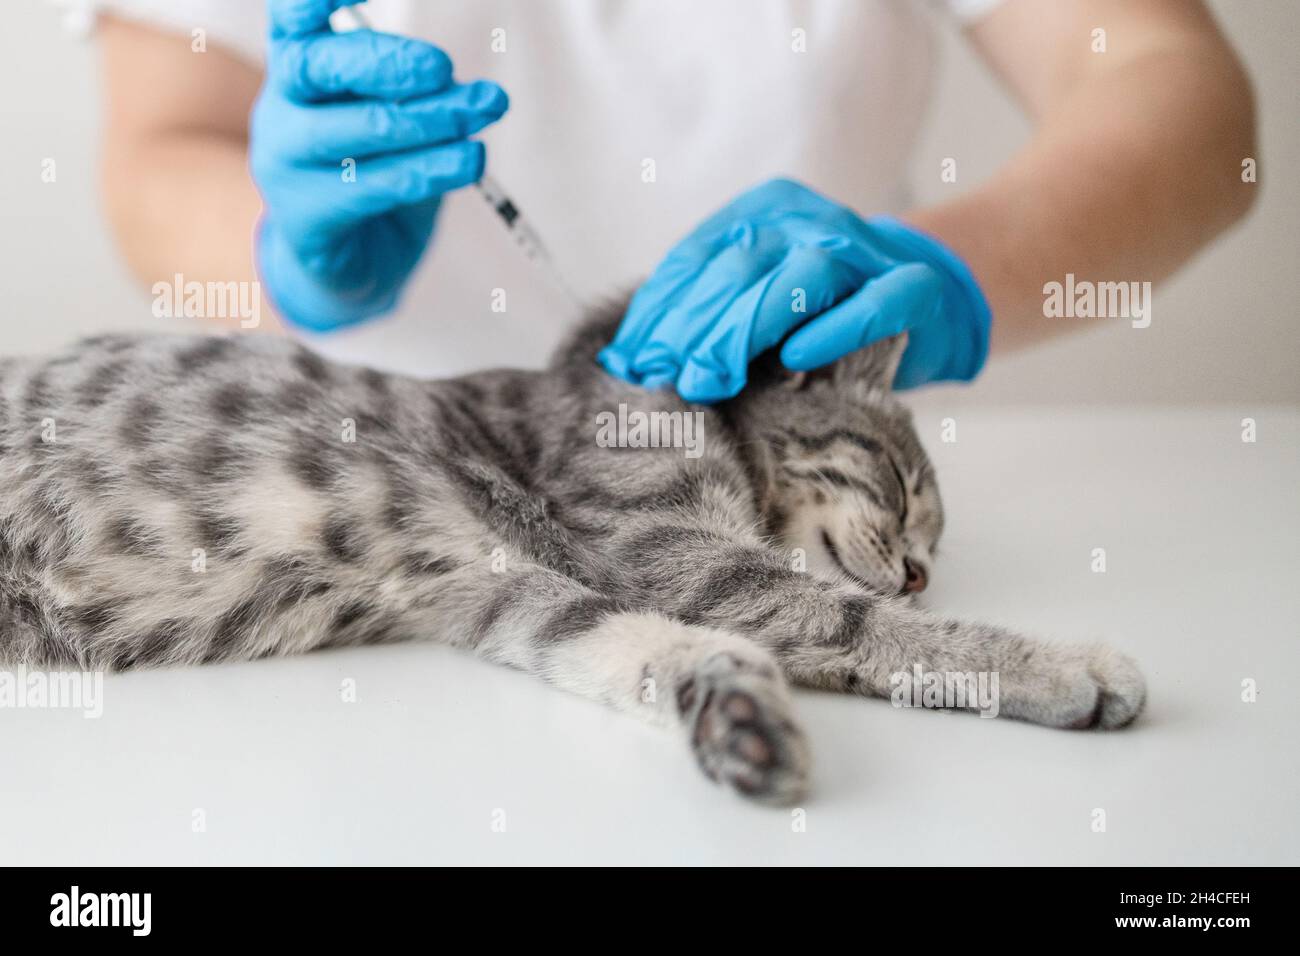 Vaccination of Pets. Veterinarian giving an injection to a pet. Animal healthcare professional Stock Photo